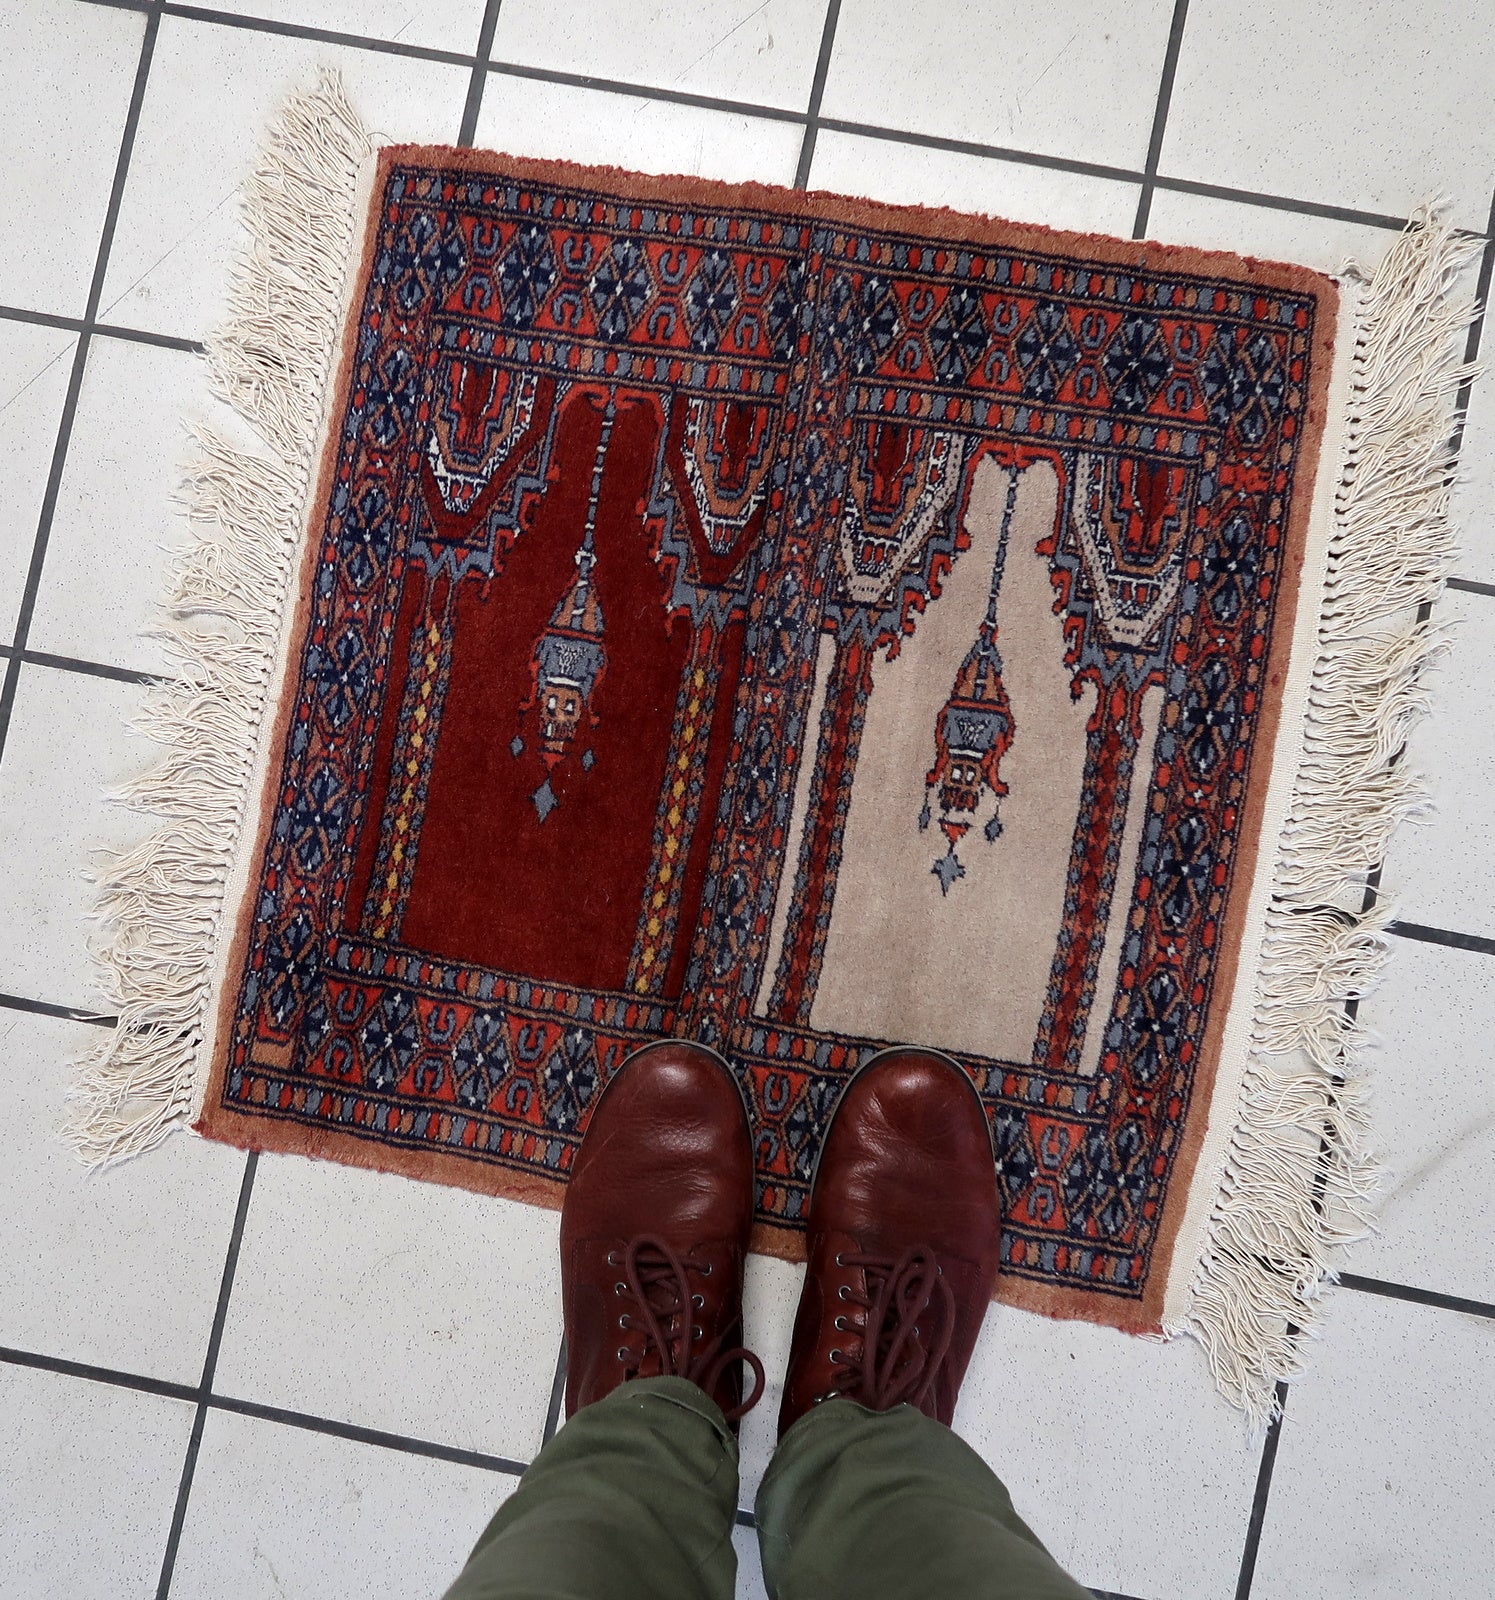 Front view of the rug draped elegantly on the floor, capturing its full dimensions and design